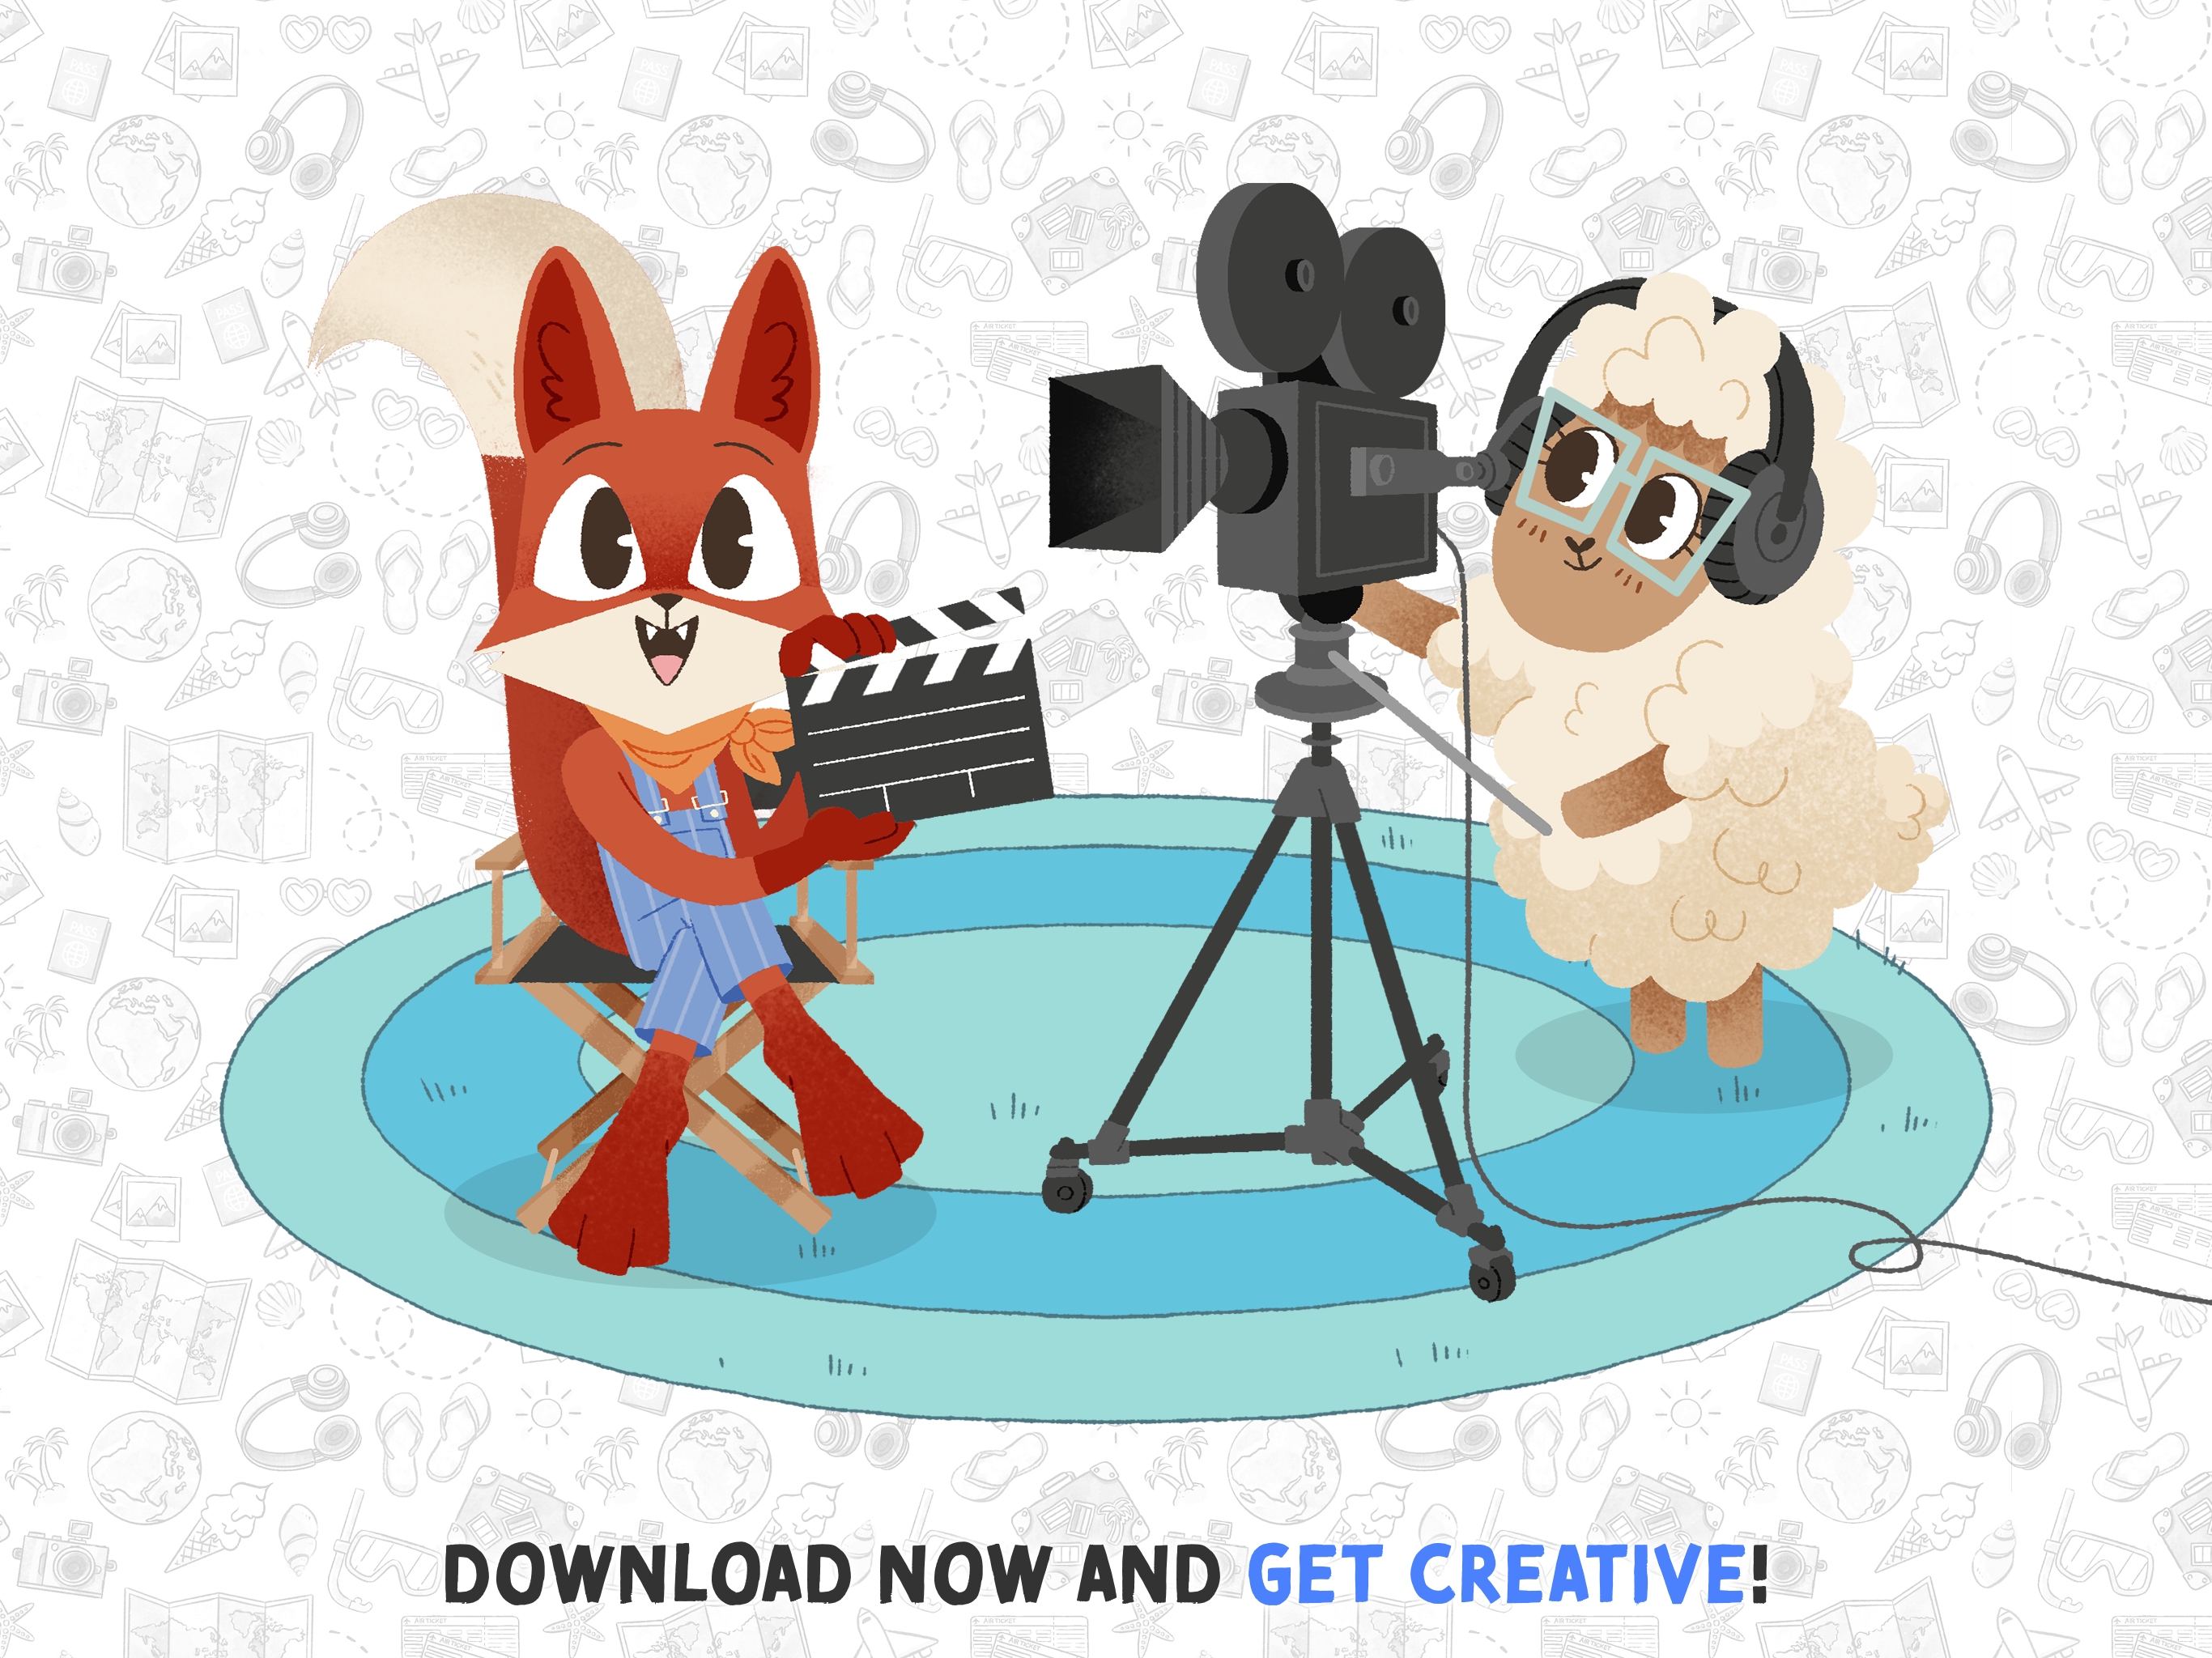 Movie Adventure – Download now and get creative